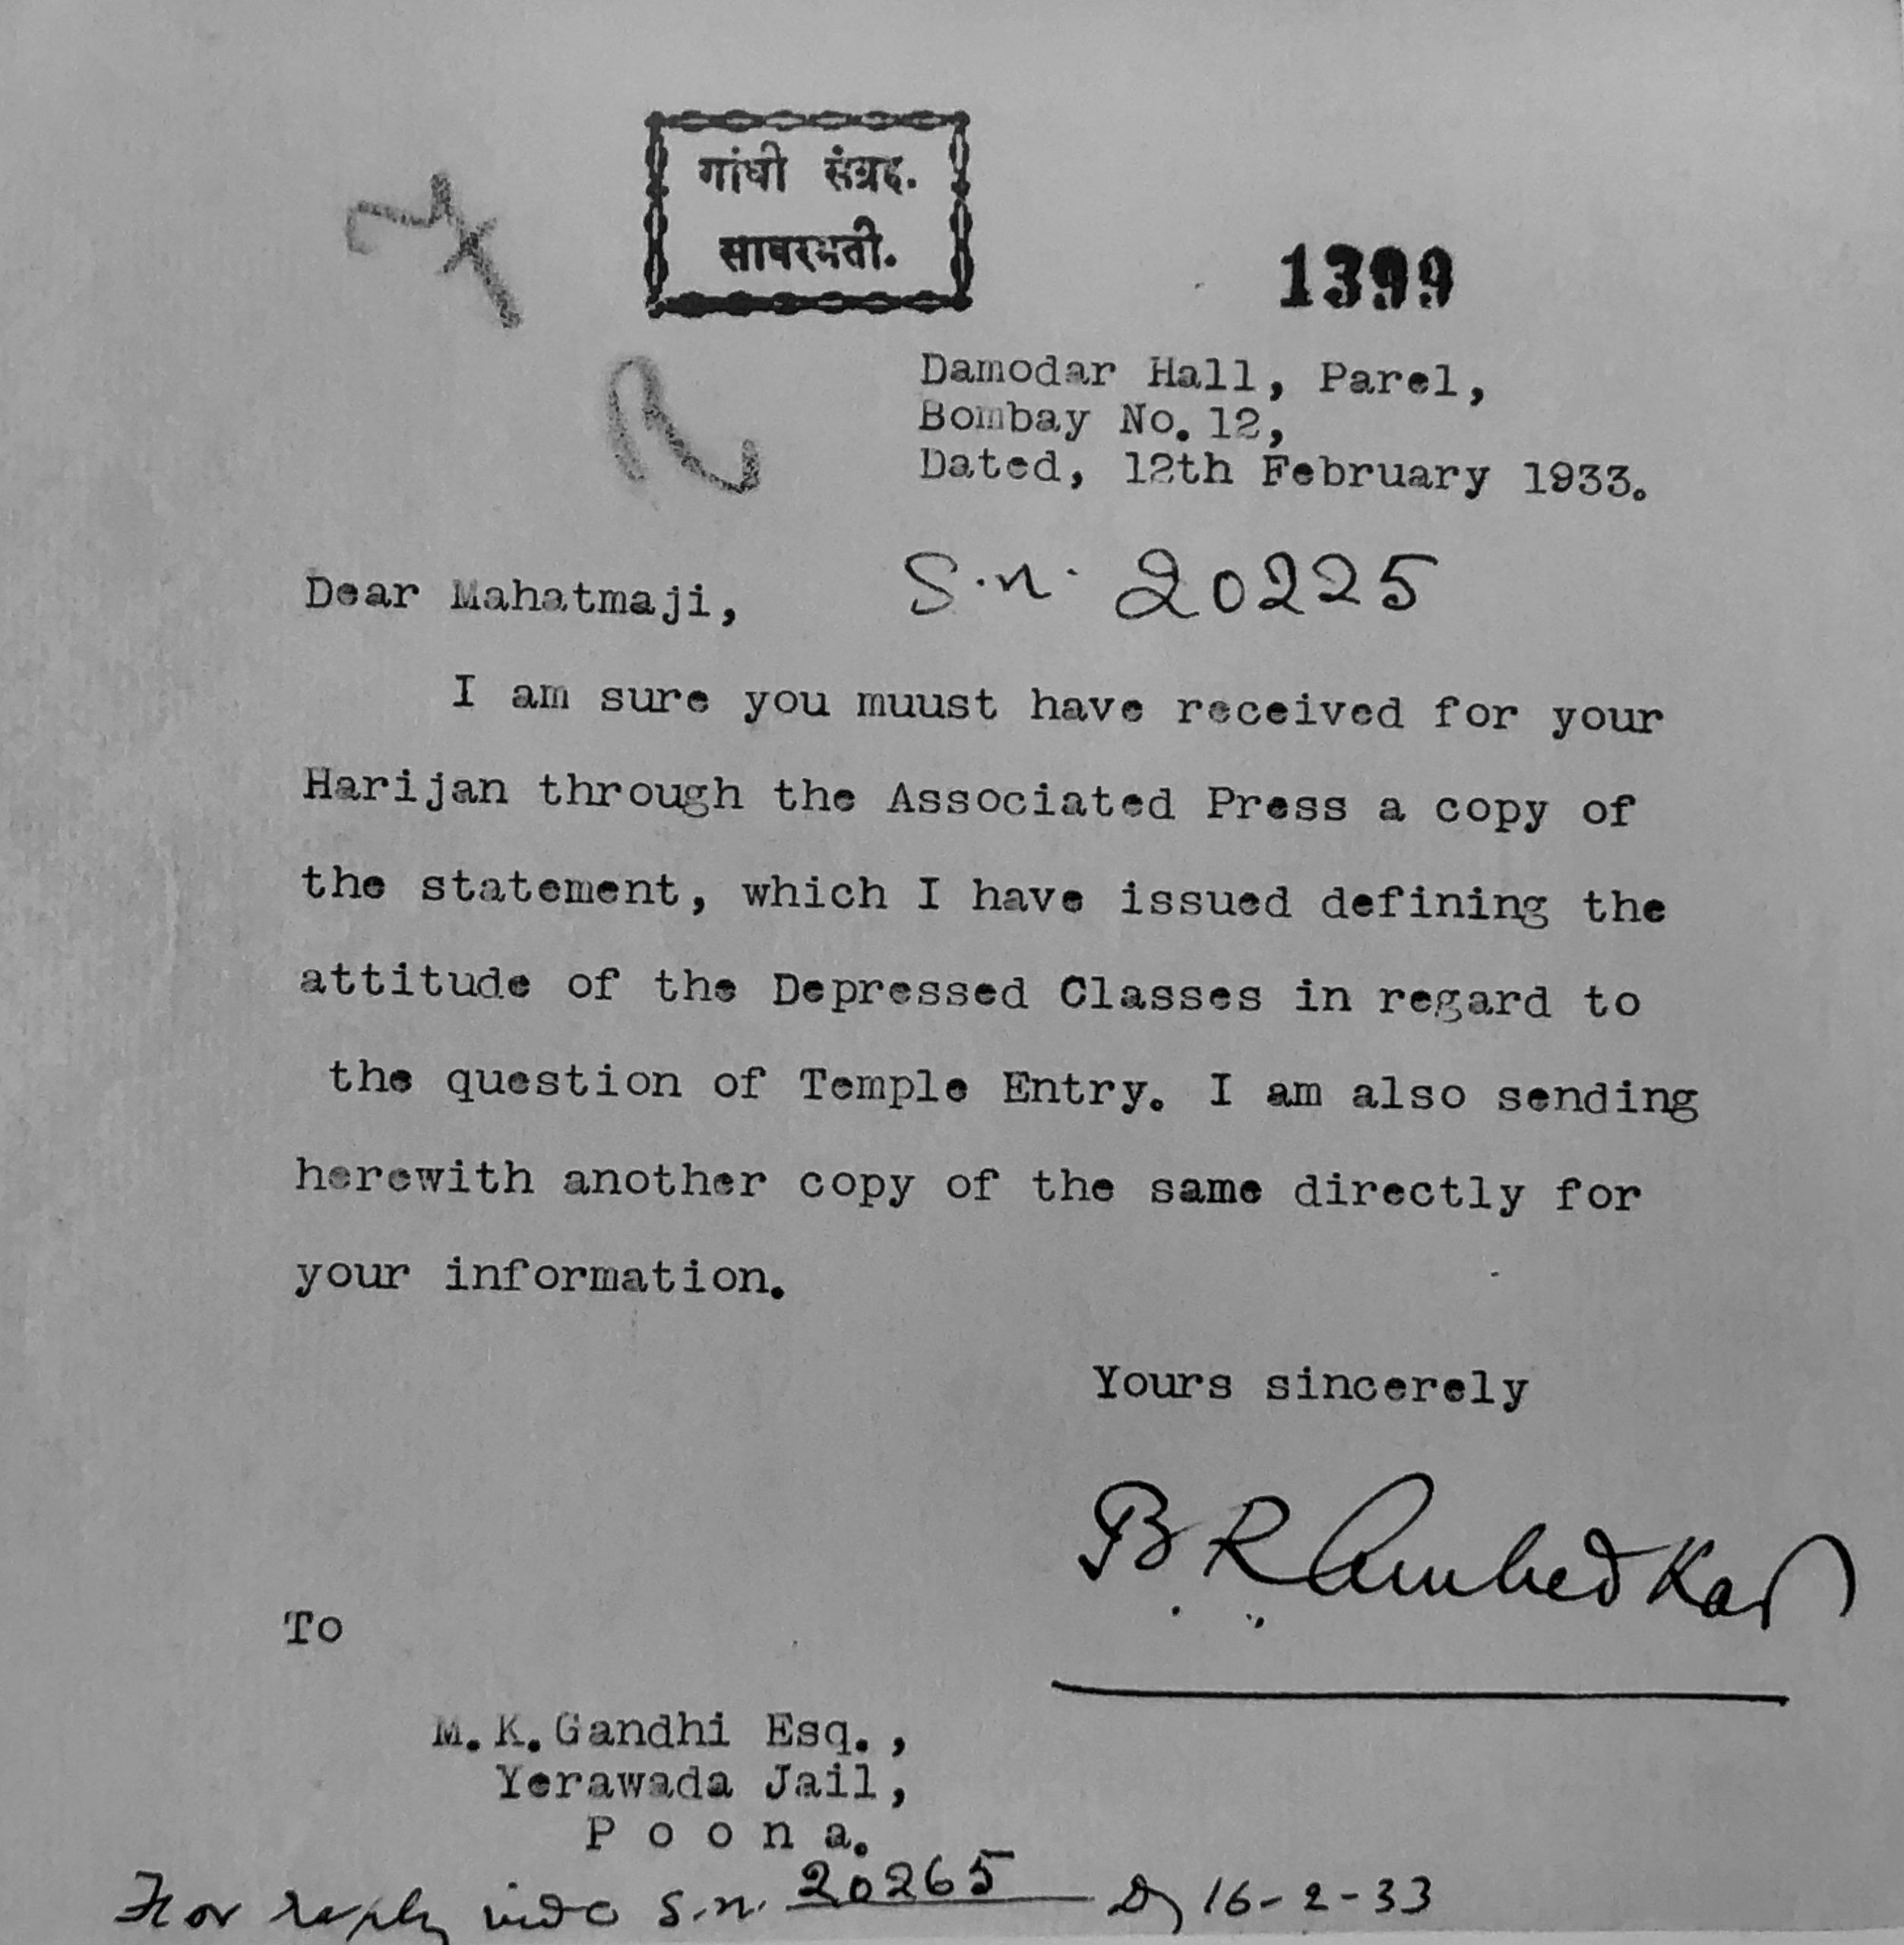 Ambedkar’s letter of 12 Februrary 1933 to Gandhi, with which he attached his statement to the press on temple entry. Gandhi responded in an interview, saying, ‘When Dr Ambedkar wants to fight varnashrama itself, I cannot be in his camp, for I believe varnashrama to be an integral part of Hinduism' | From Vijay Surwade's collection, courtesy of Navayana